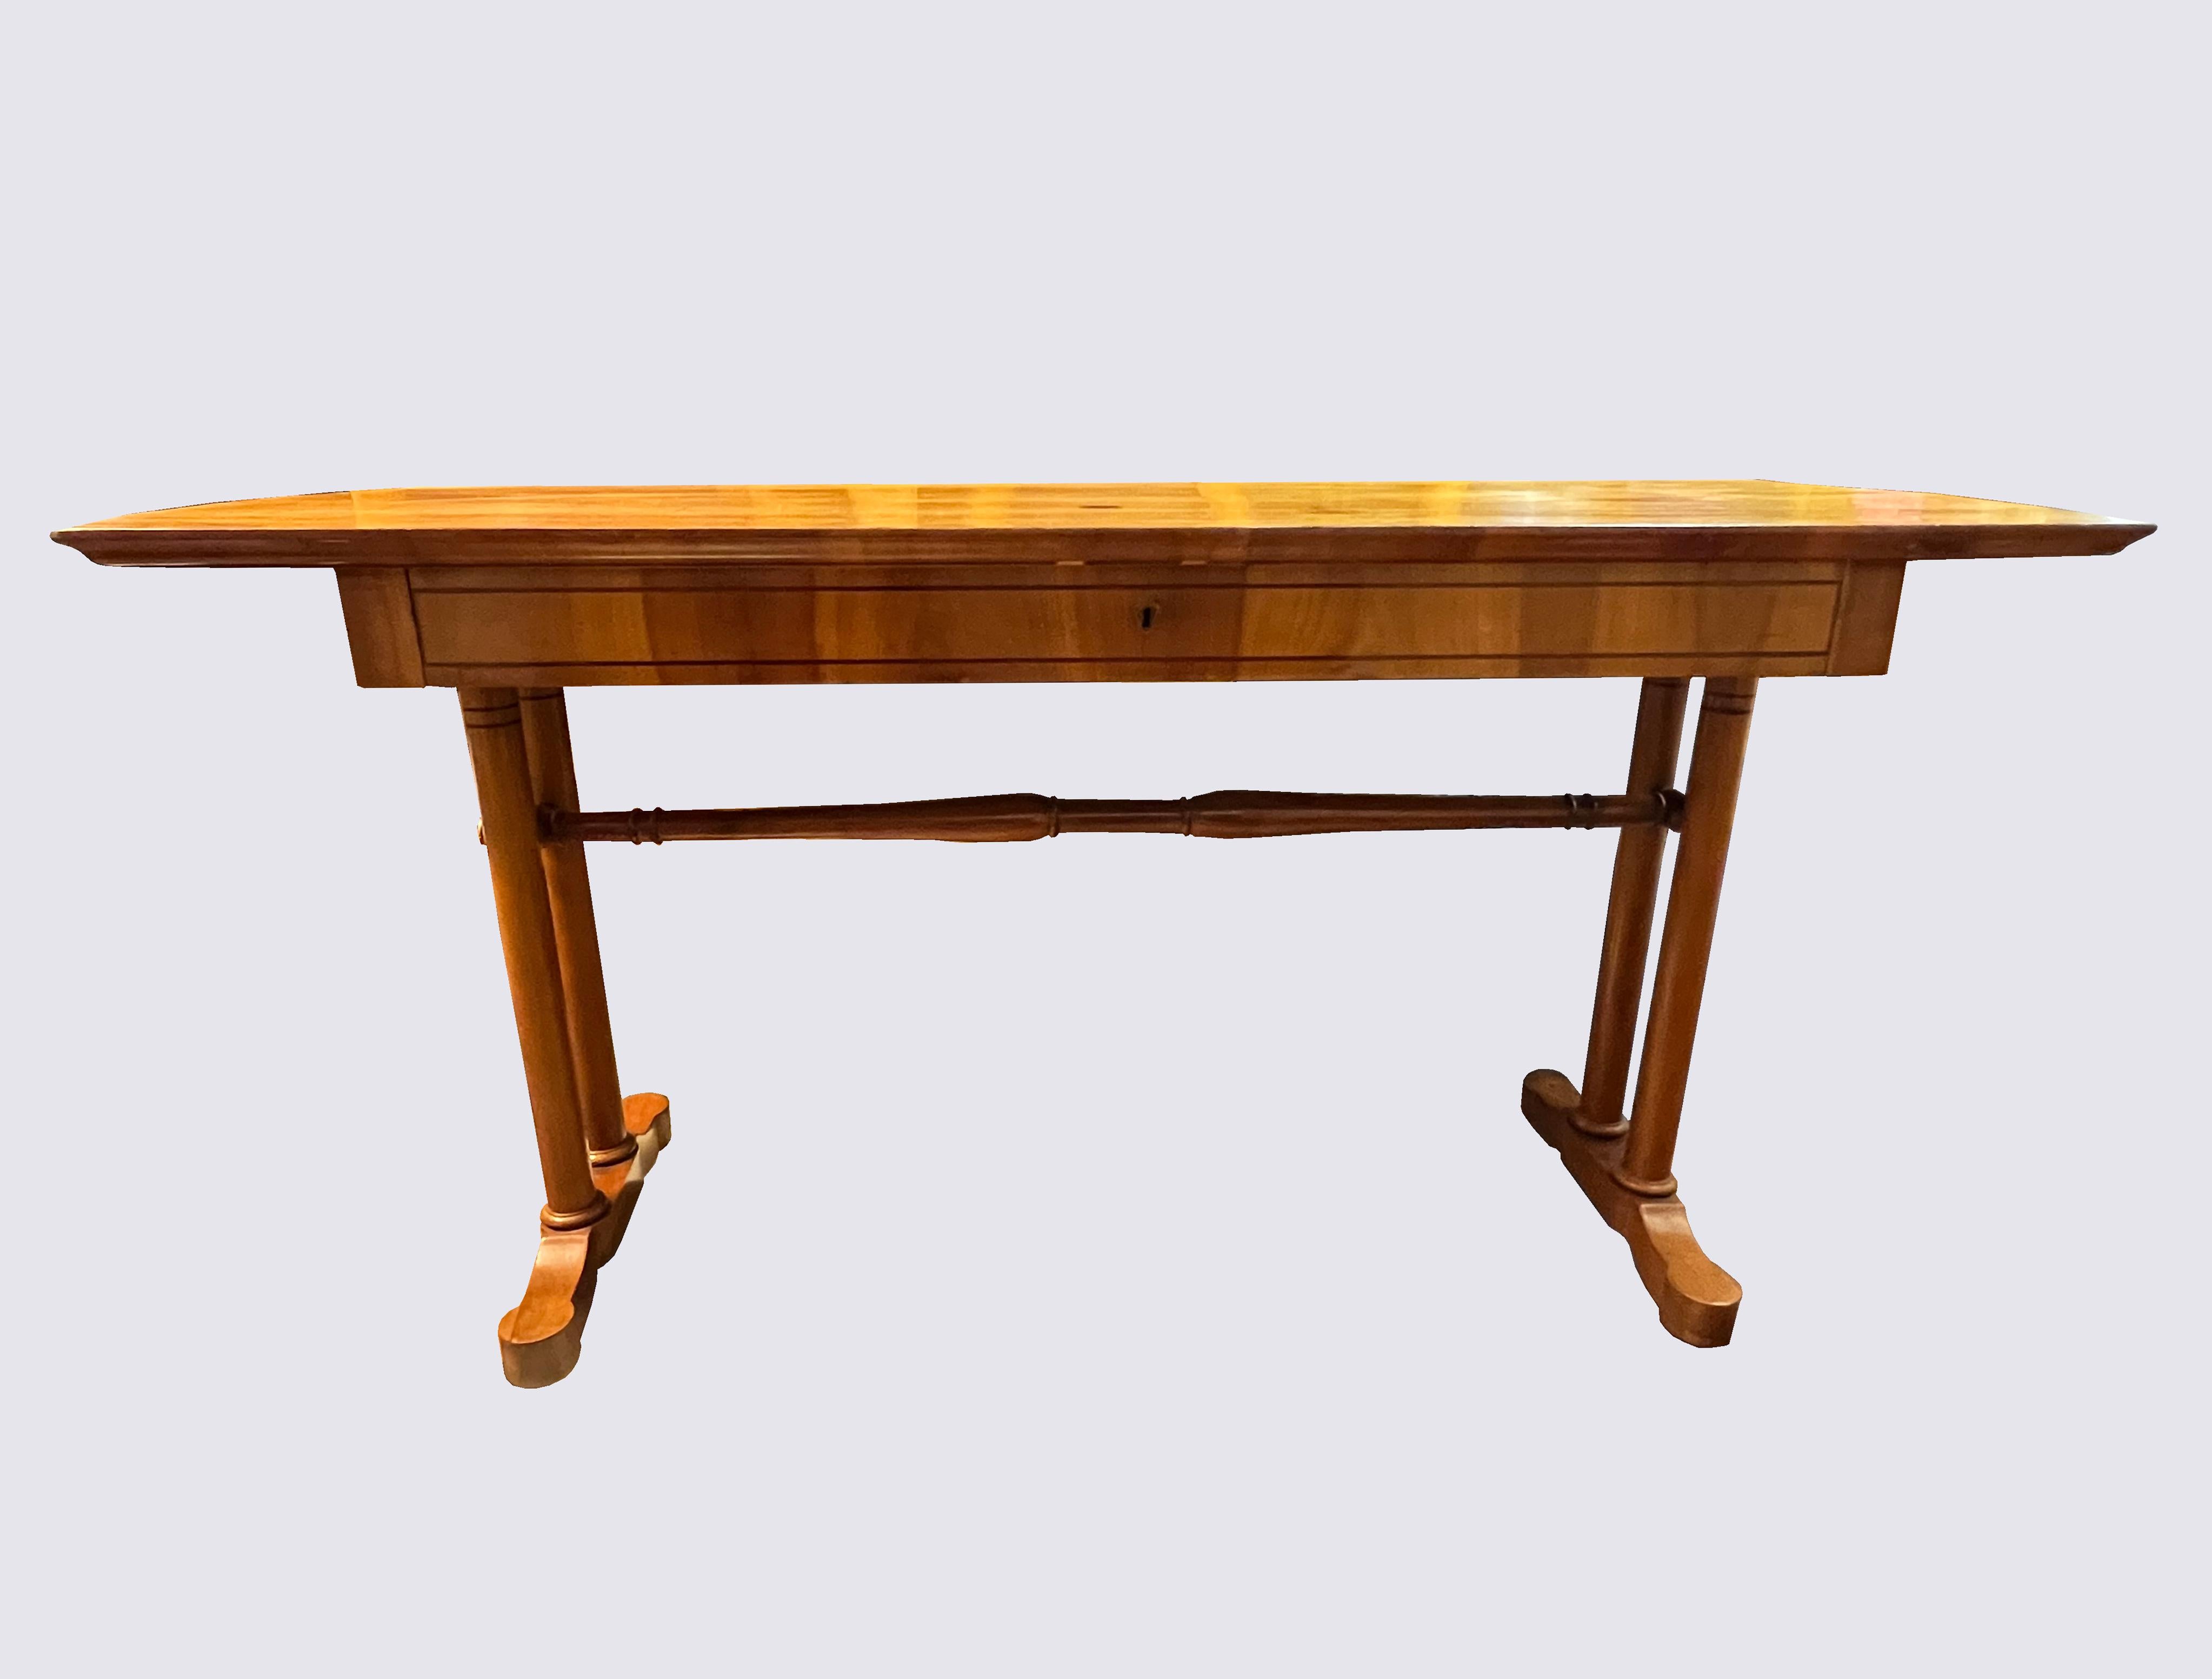 Hello,
This exceptional Viennese Biedermeier cherry console side table was made circa 1825.

Viennese Biedermeier is distinguished by their sophisticated proportions, rare and refined design and excellent craftsmanship and continue to have a great